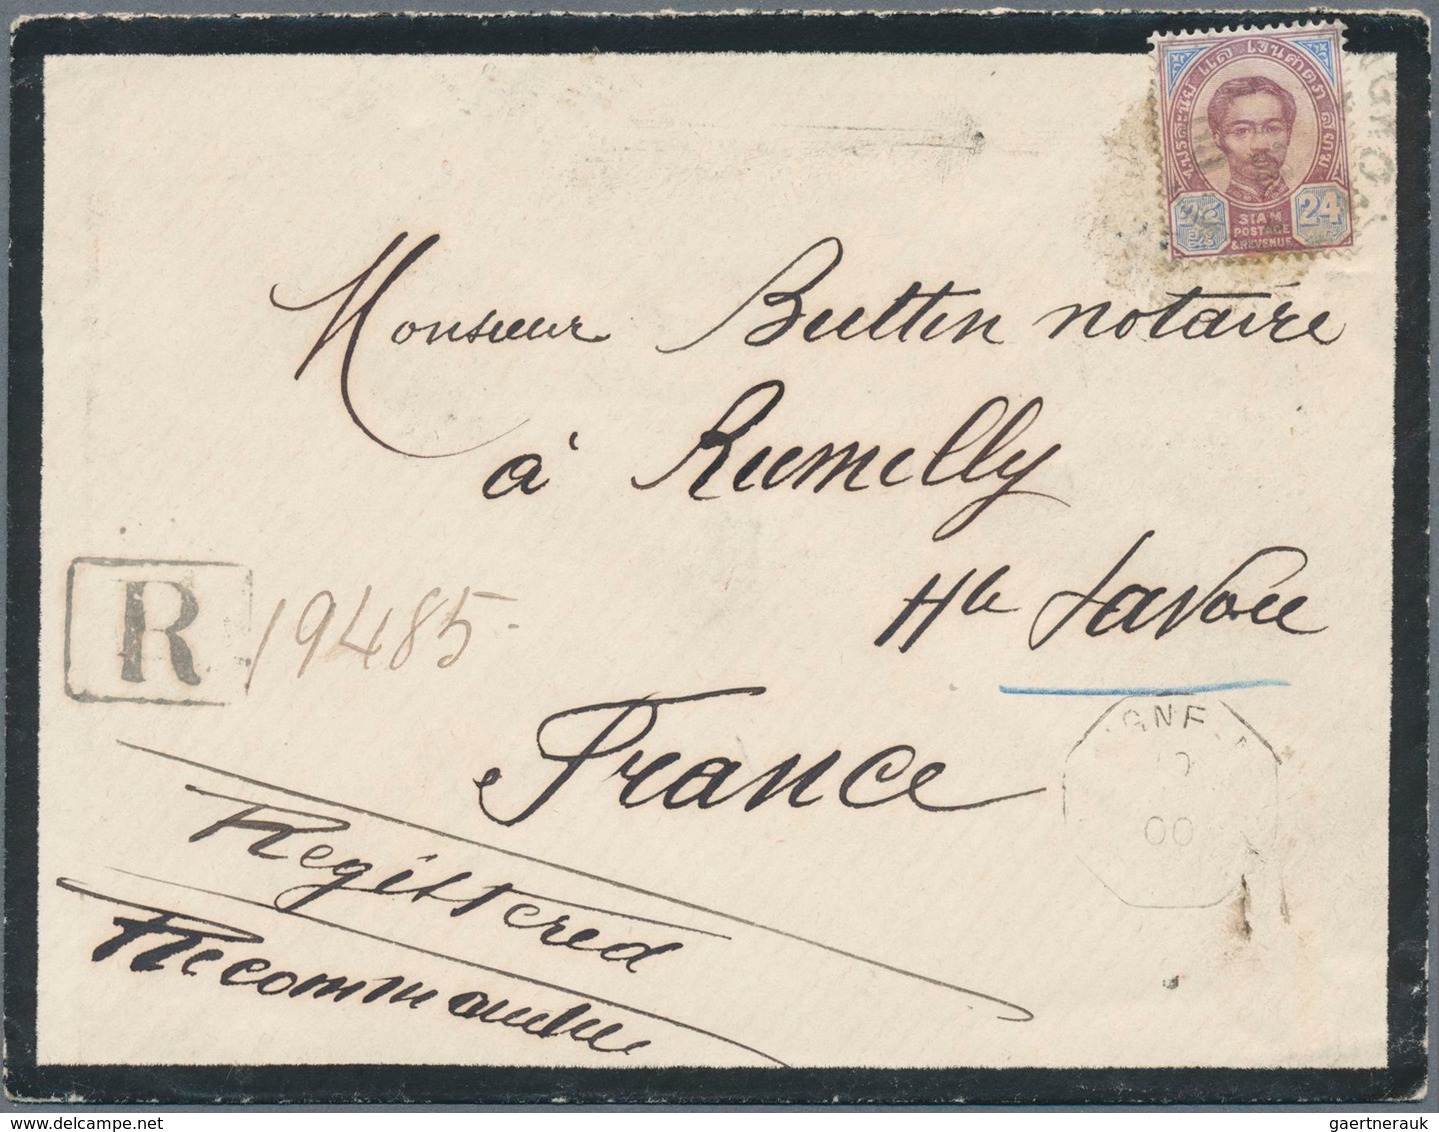 Thailand: 1900 Registered Mourning Cover From Bangkok To Rumilly, France Franked By 1887 24c. Lilac - Thaïlande